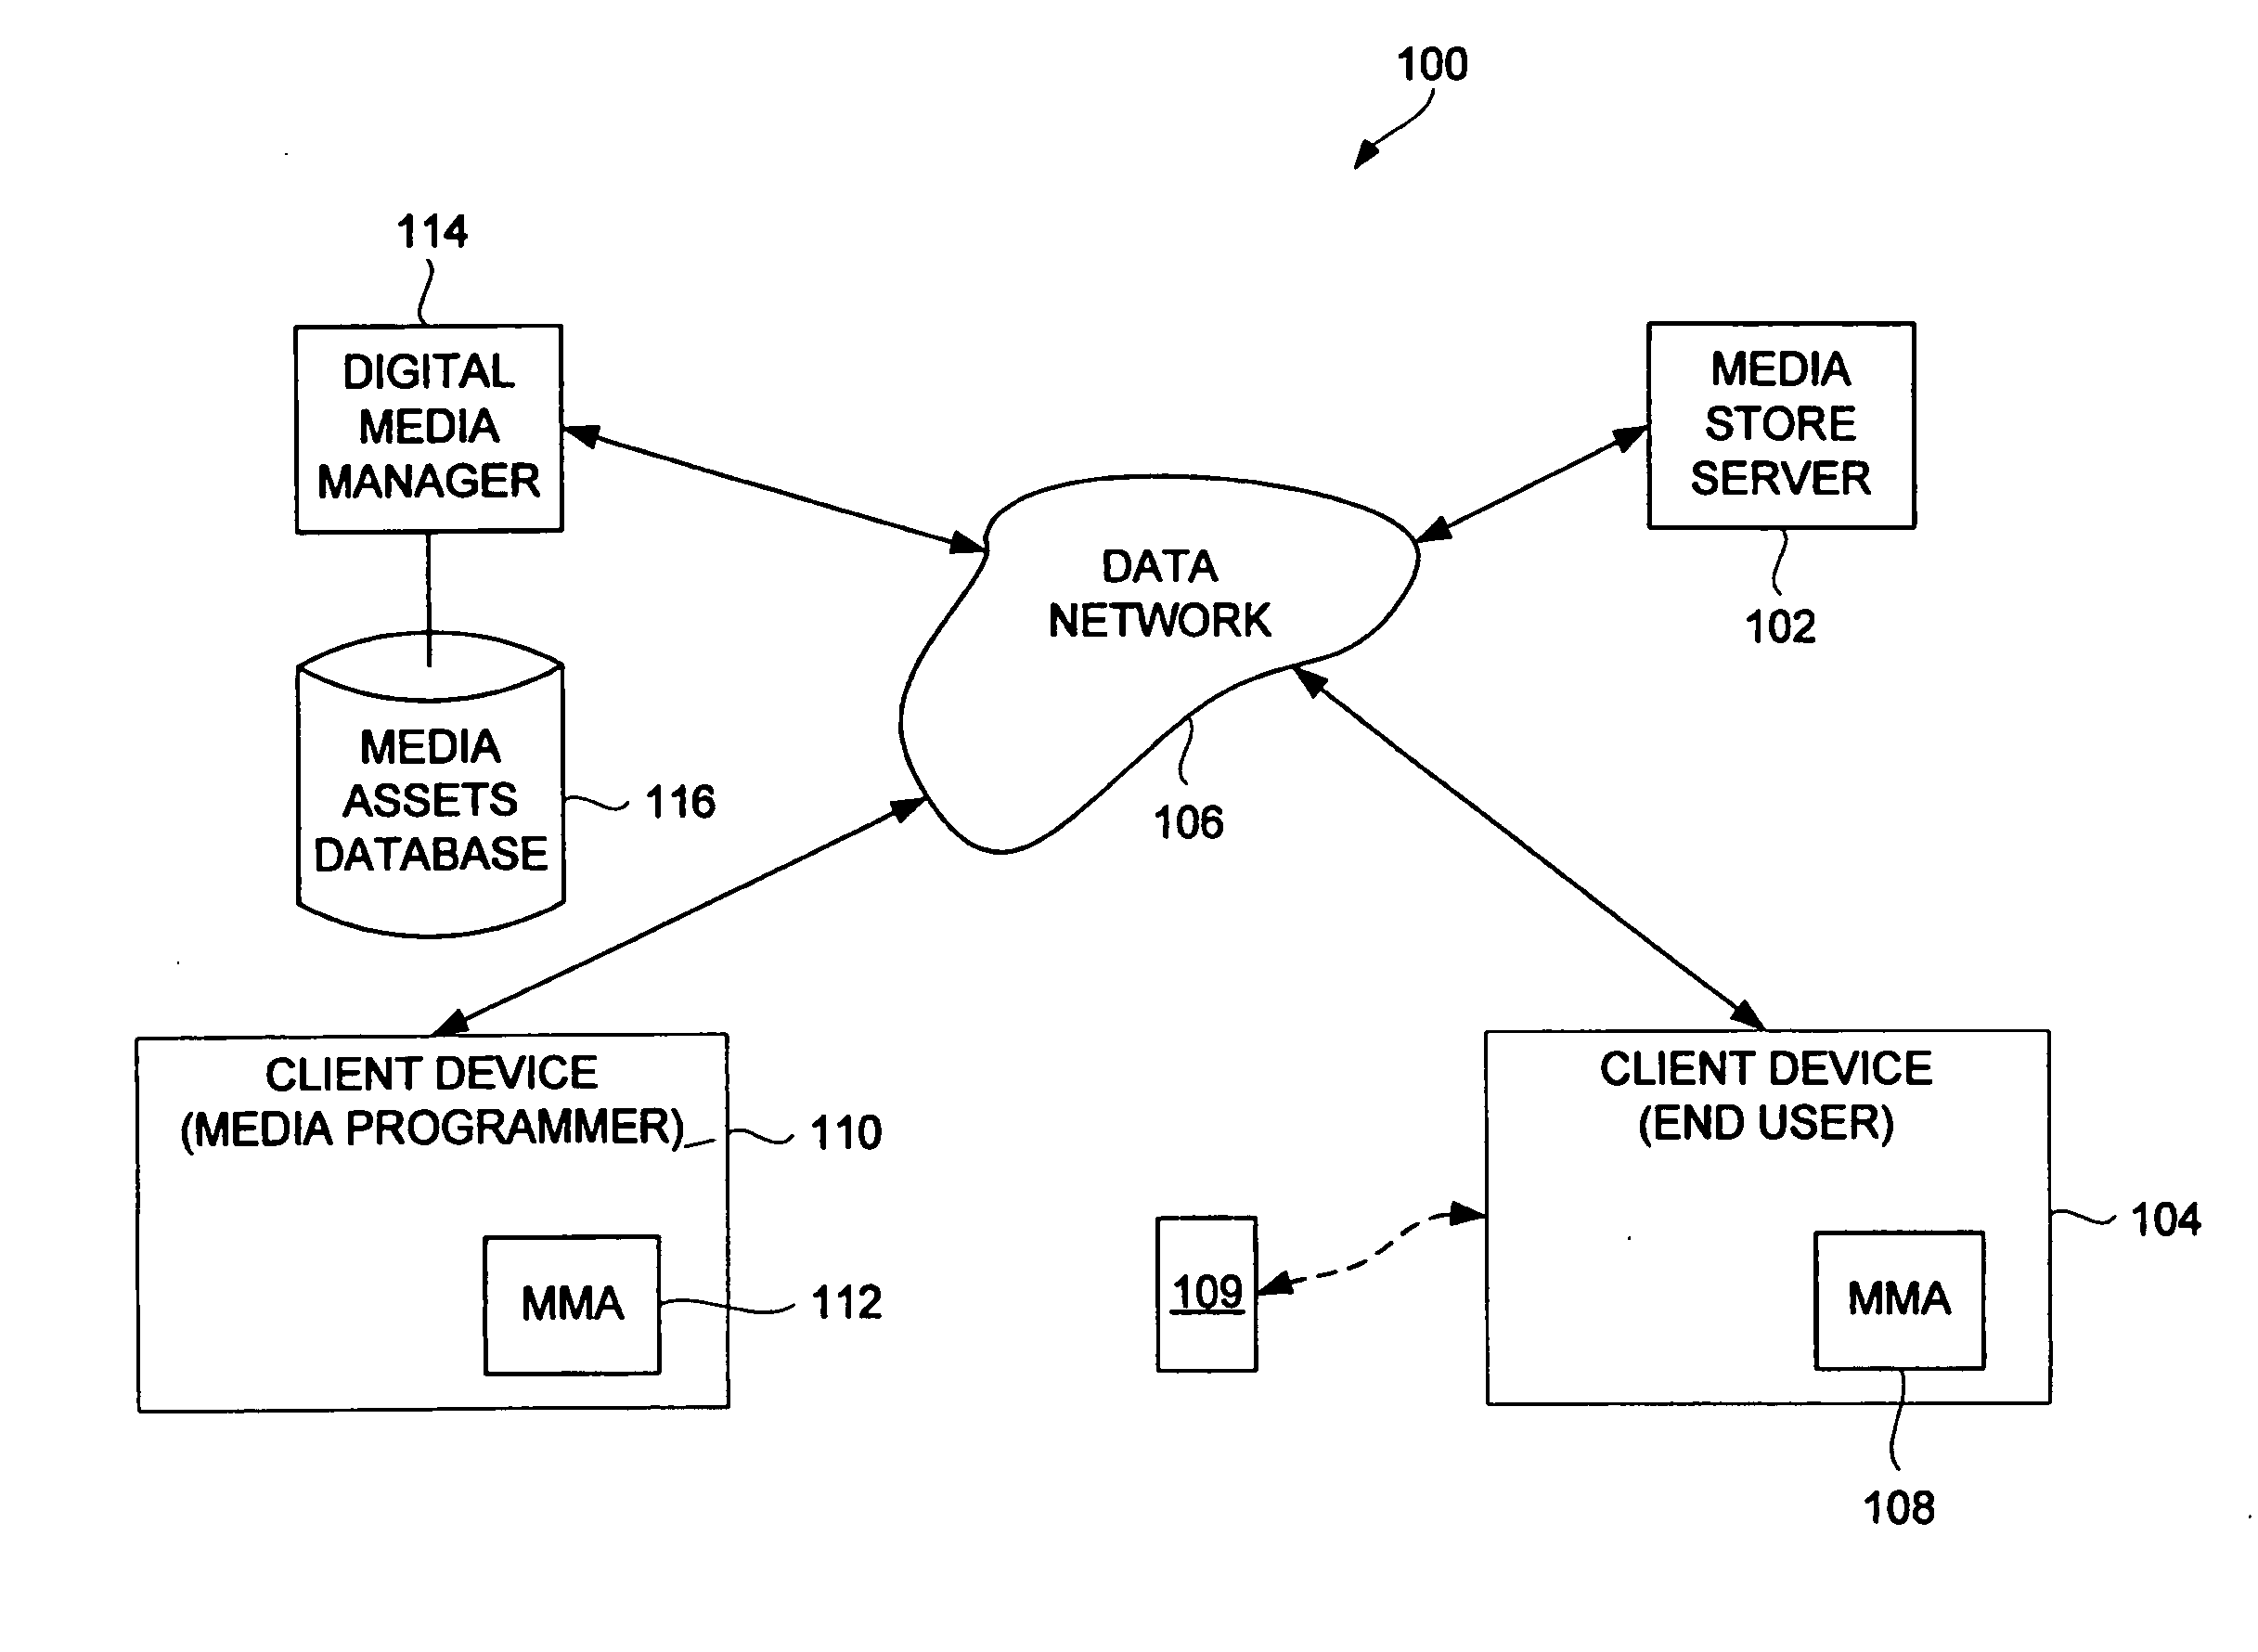 Podcast organization and usage at a computing device